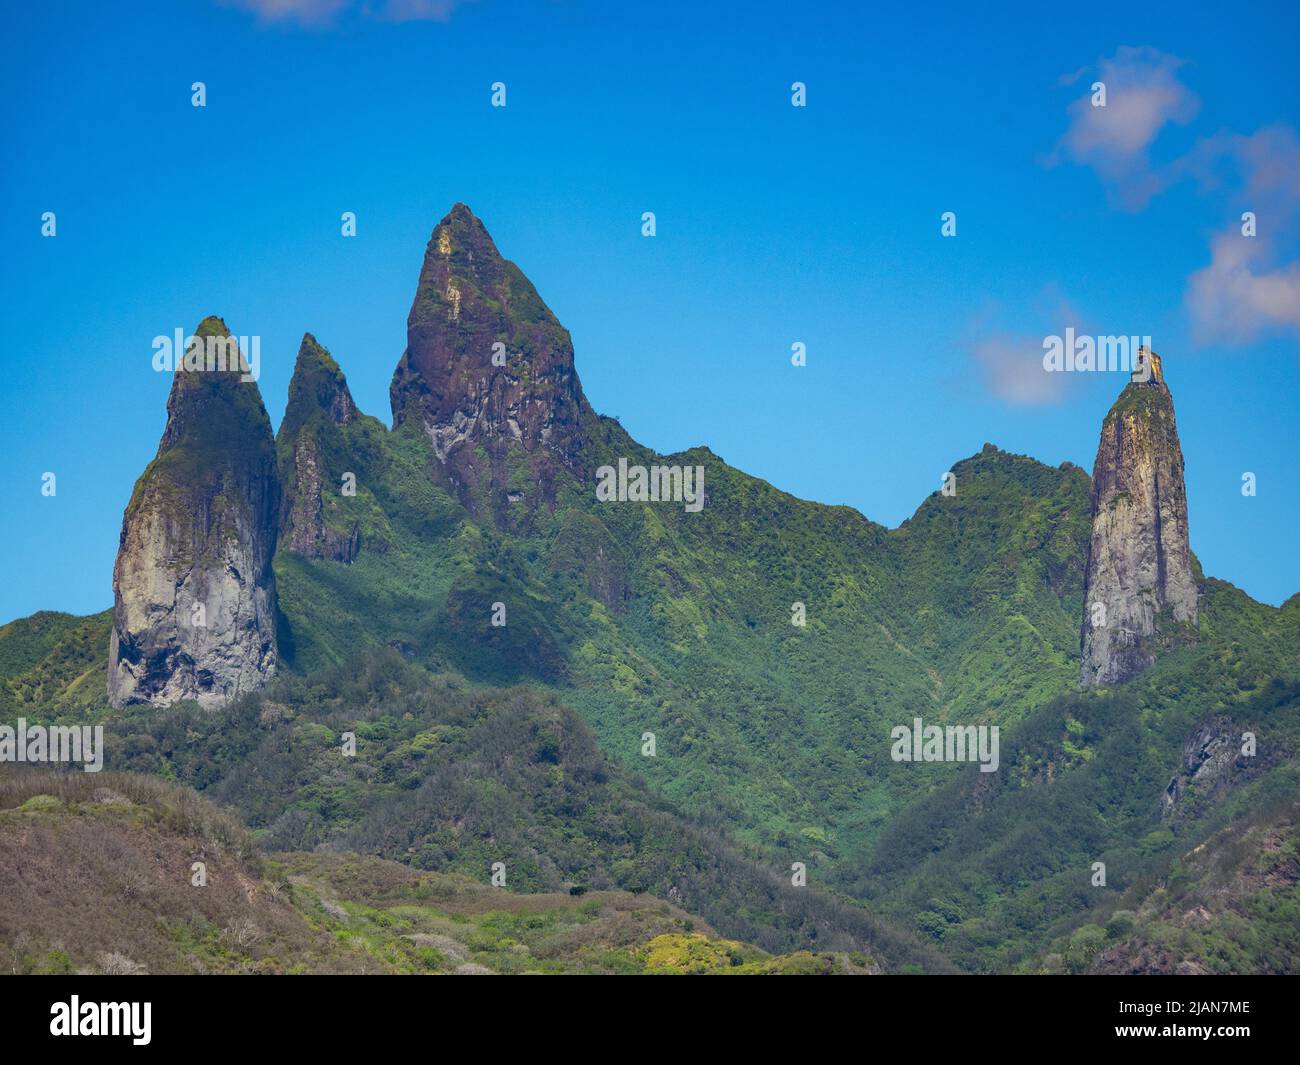 The stunning scenery of Ua Pou island with its phonolitic rocks in the Marquesas of French Polynesia Stock Photo